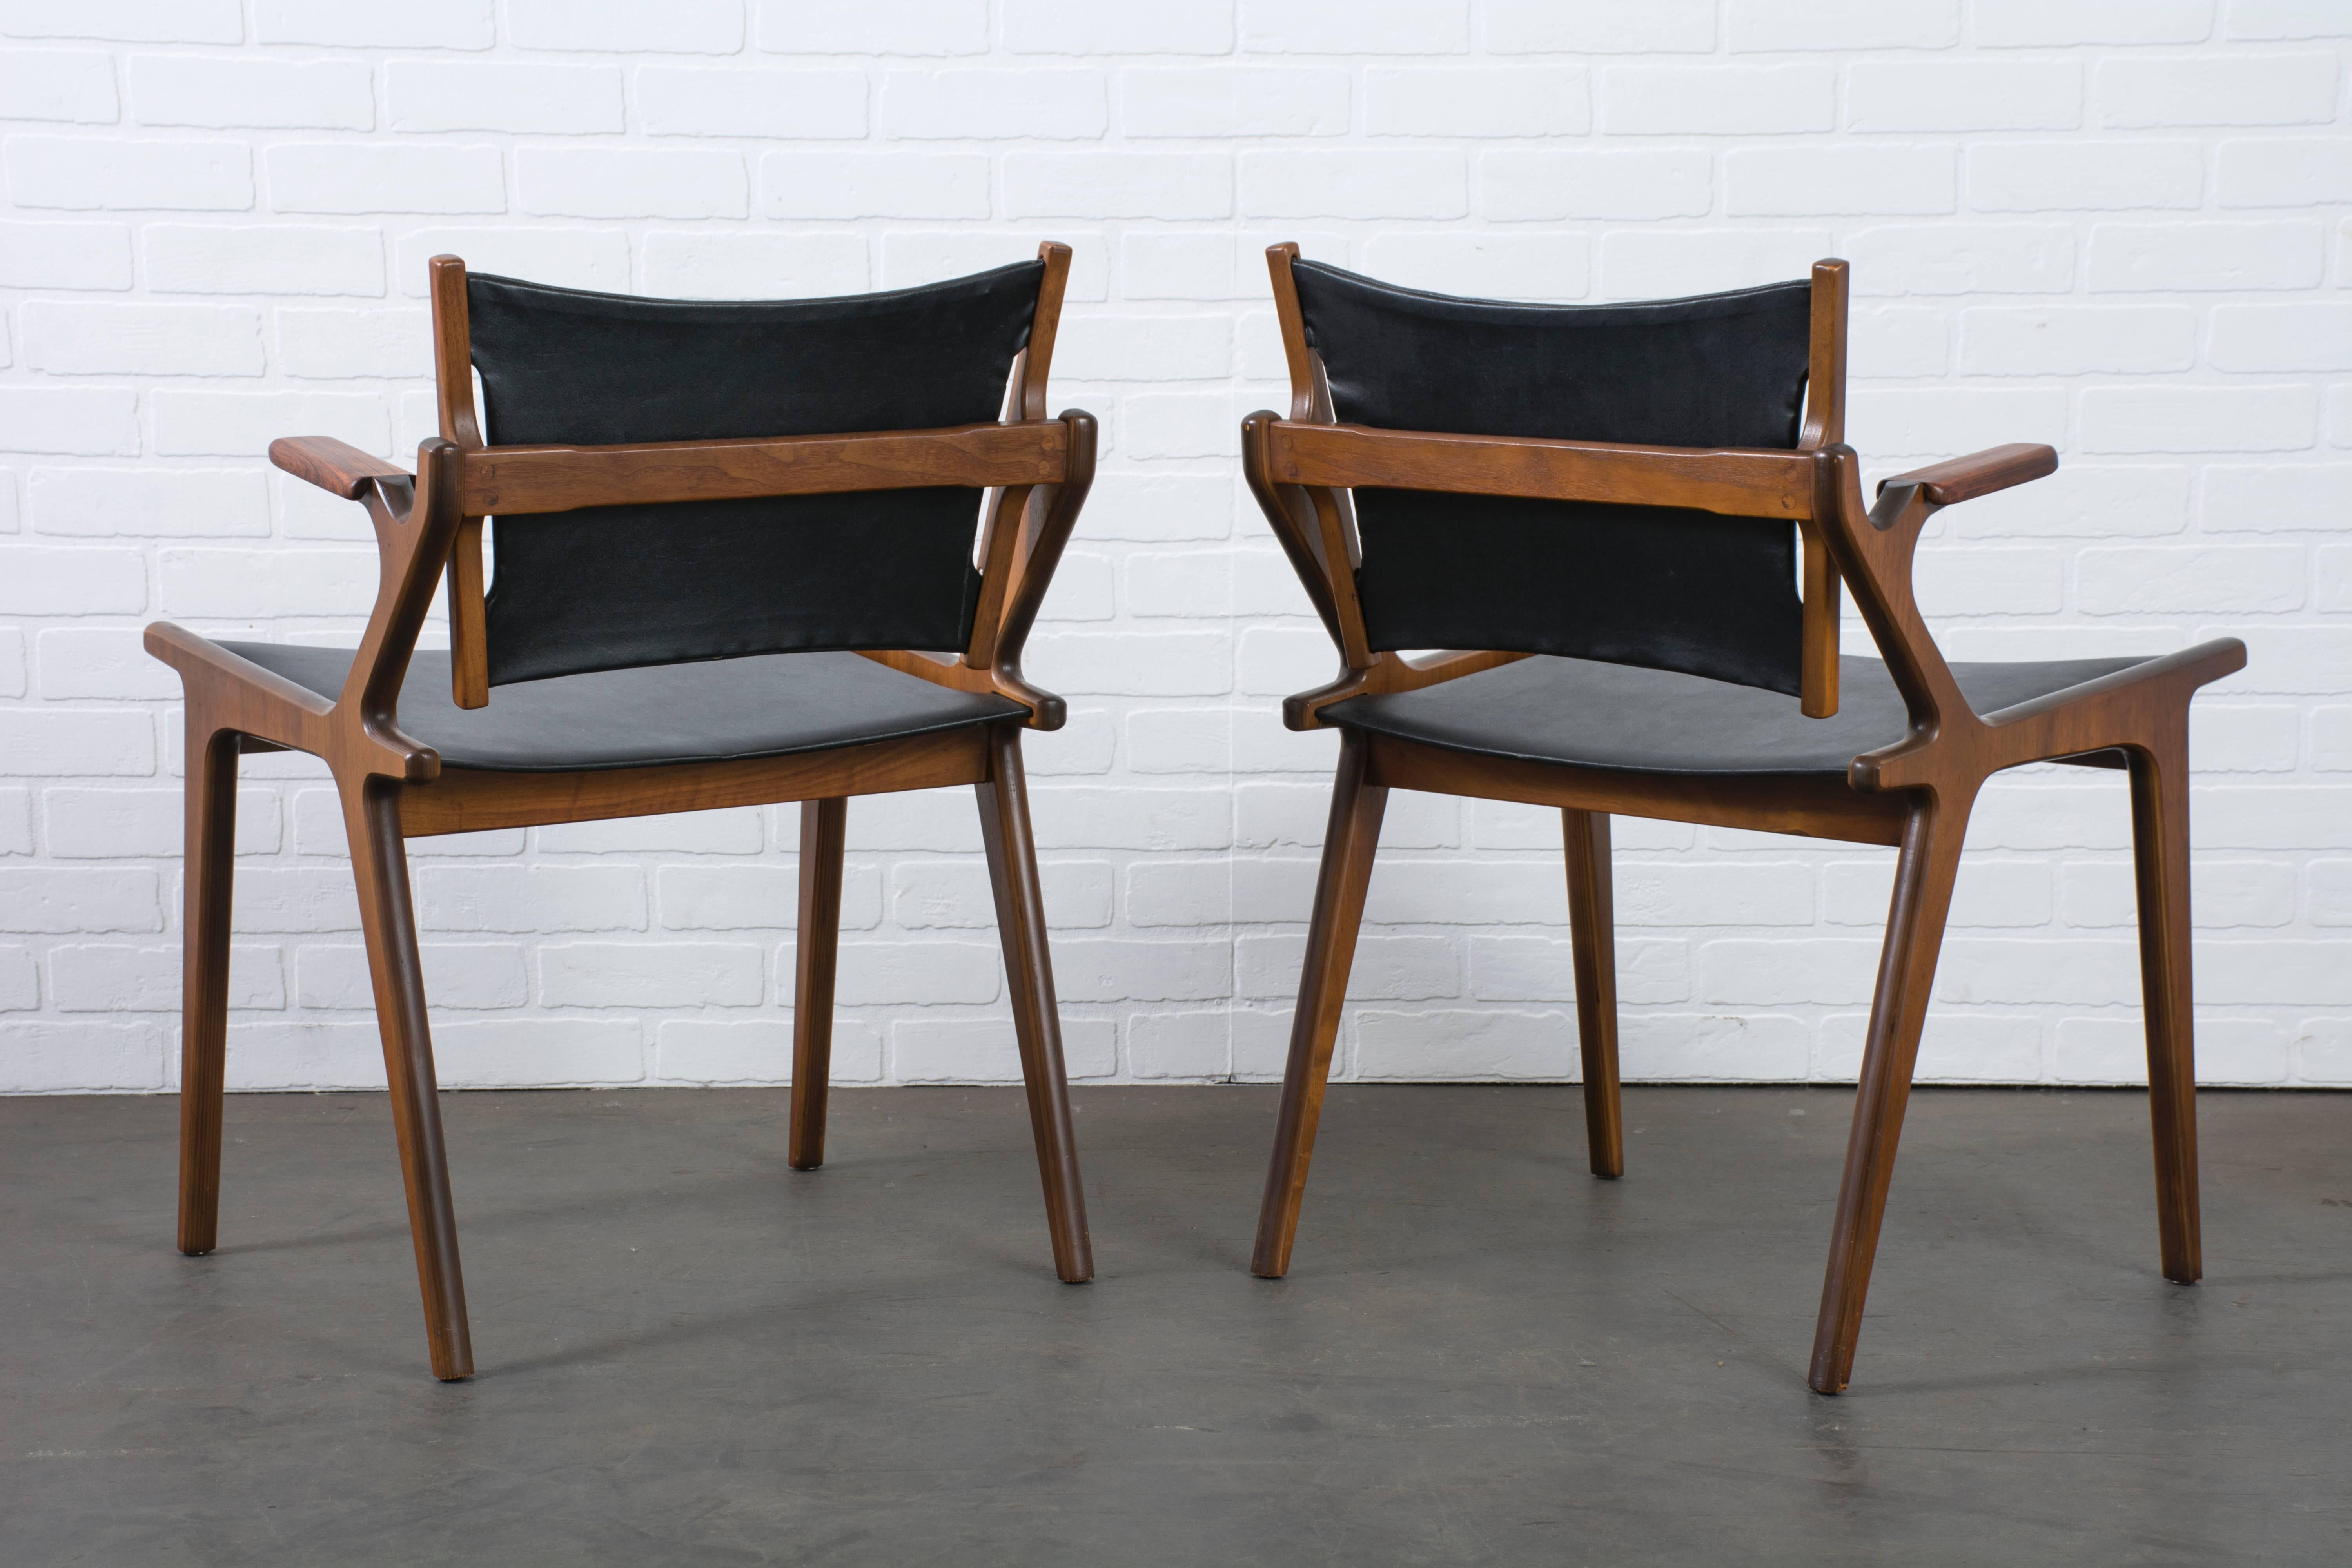 American Pair of Vintage Mid-Century Chairs by Richard Thompson for Glenn of California